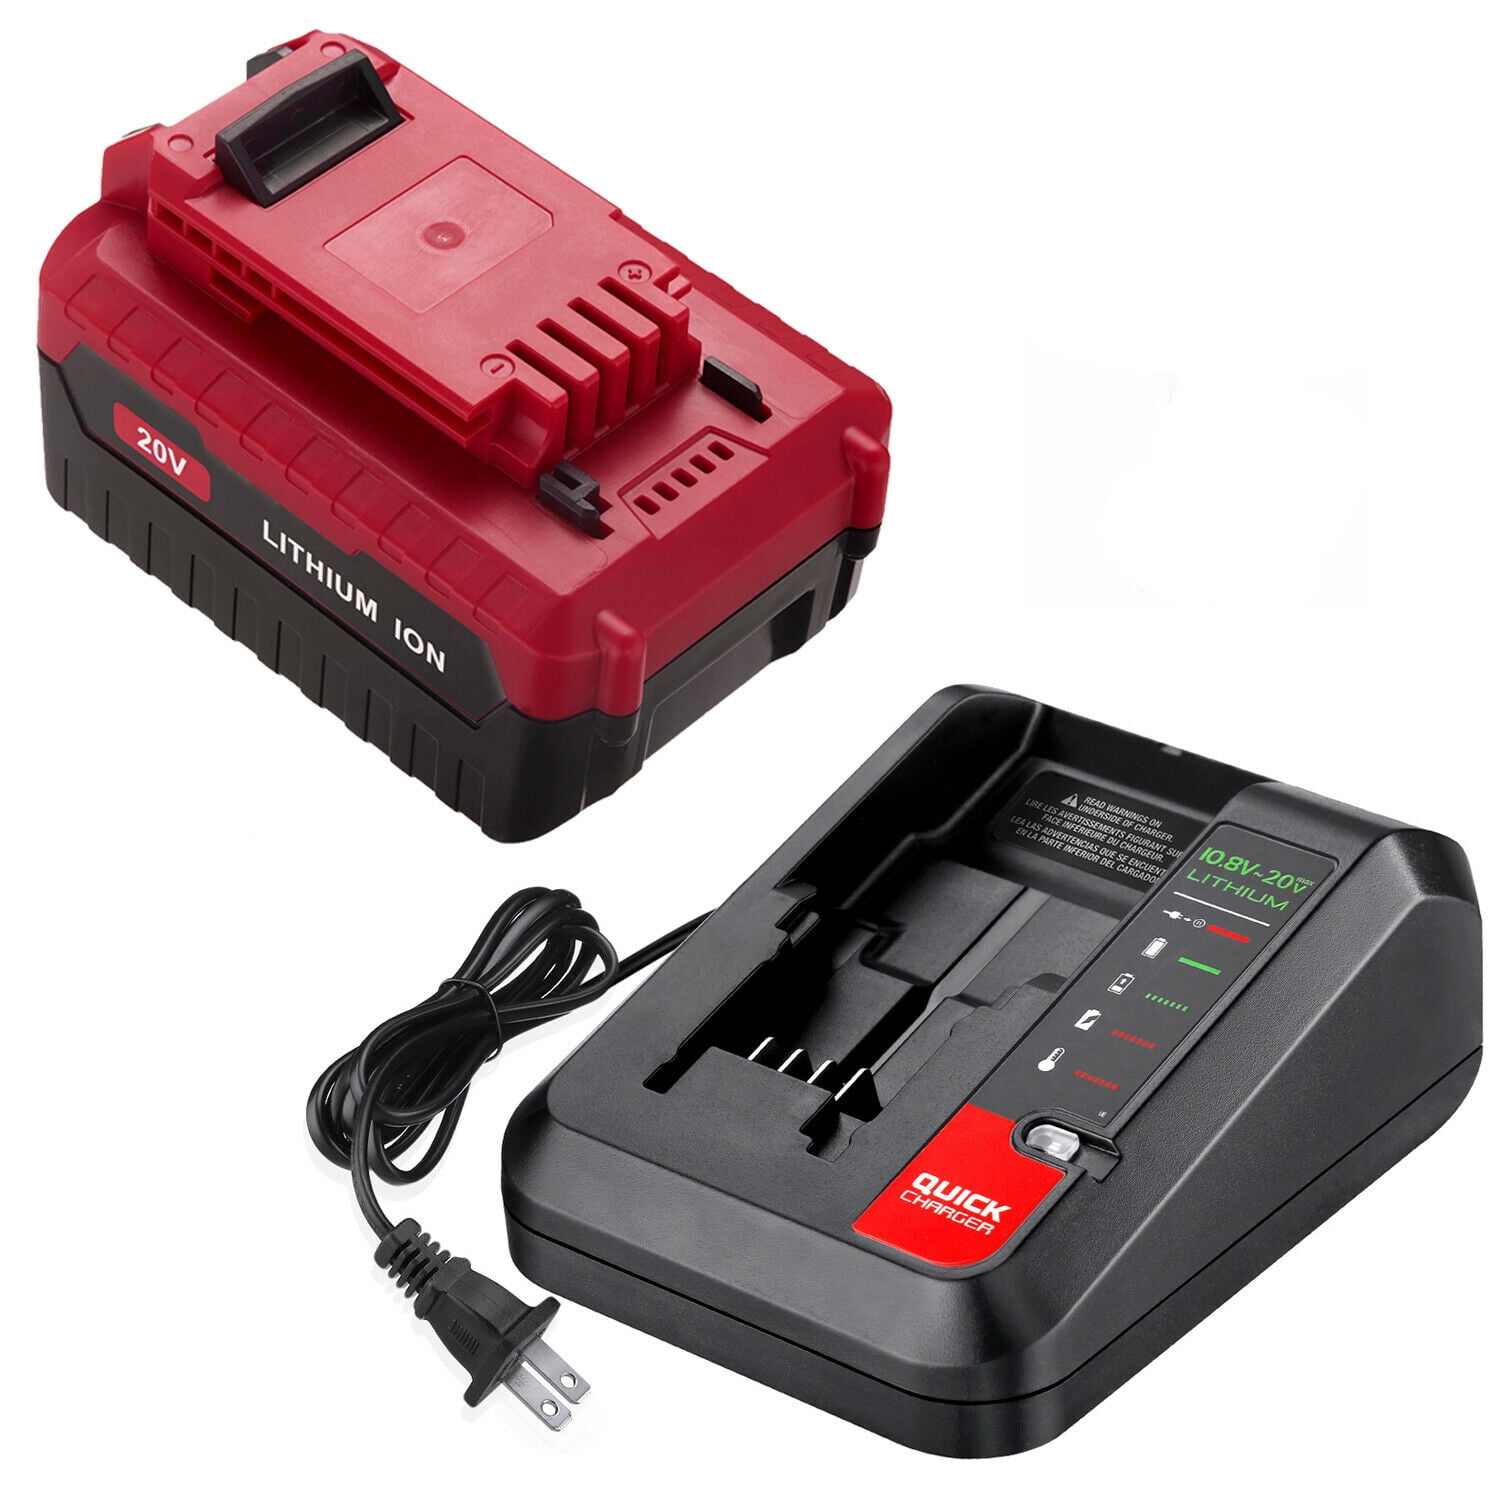 New Replacement Lithium Battery Charger for Black and Decker PORTER CABLE  Stanley Lithium Battery Charger 2A 10.8-20V 100-240V